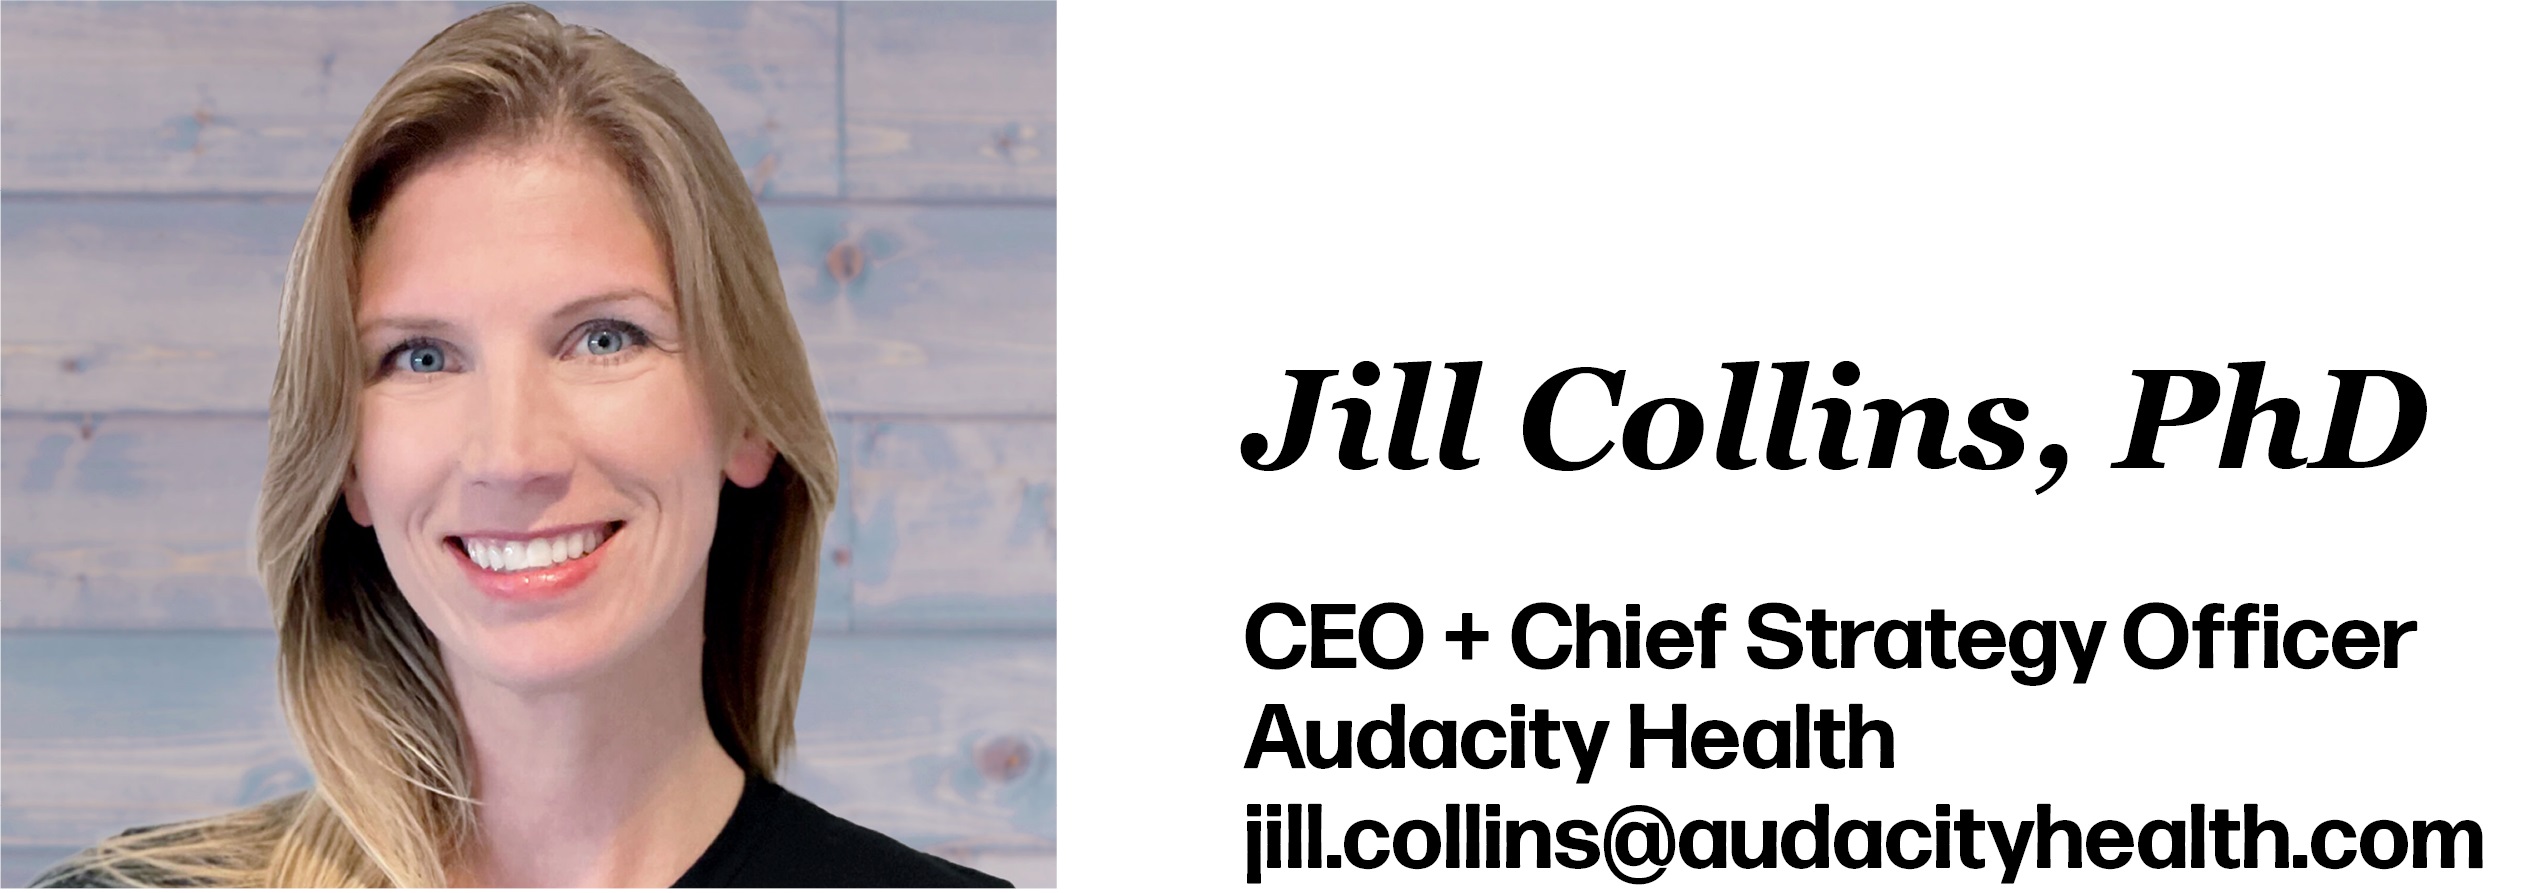 Jill Collins, PhD is CEO + Chief Strategy Officer at Audacity Health. Her email is jill.collins@audacityhealth.com. 